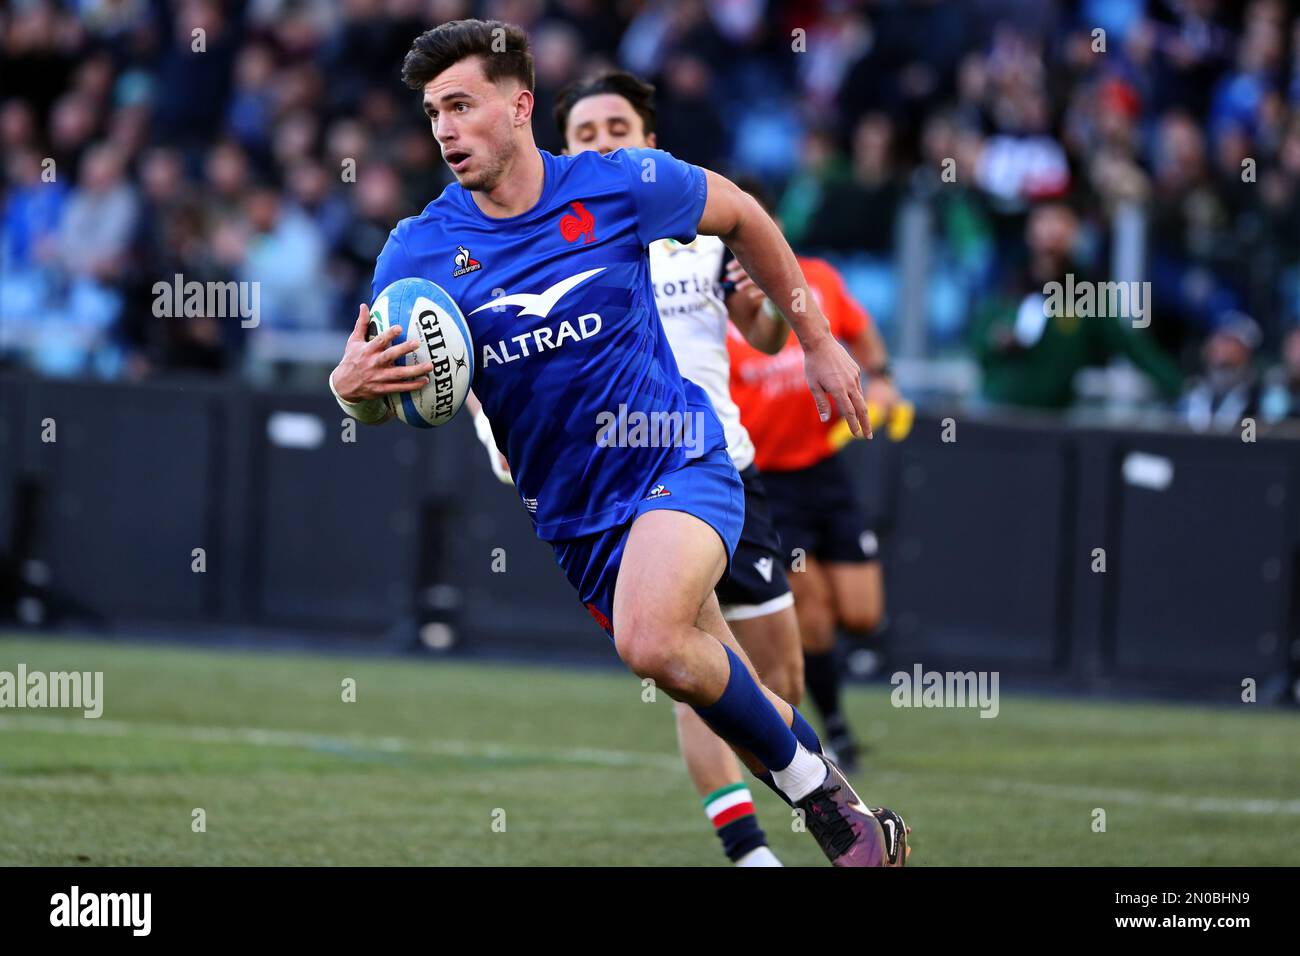 Rome, . 05th Feb, 2023. Rome, Italy 05.02.2023: ETHAN DUMORTIER (FRA) score  a try (6-19) during the Guinness Six Nations 2023 rugby match between ITALY  vs France at Stadio Olimpico on February